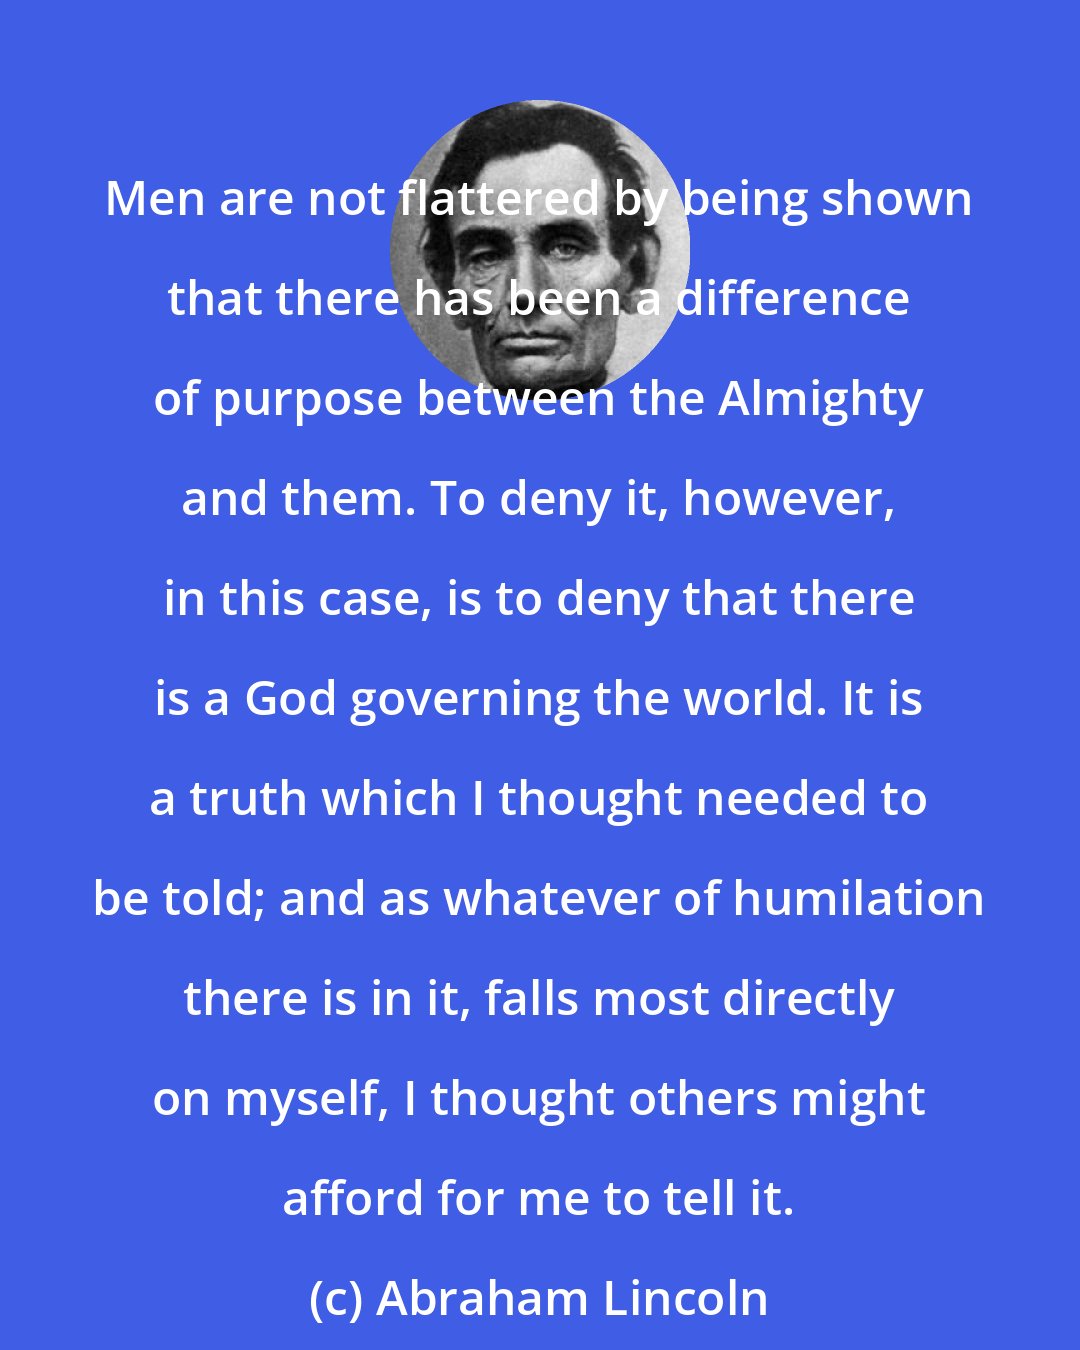 Abraham Lincoln: Men are not flattered by being shown that there has been a difference of purpose between the Almighty and them. To deny it, however, in this case, is to deny that there is a God governing the world. It is a truth which I thought needed to be told; and as whatever of humilation there is in it, falls most directly on myself, I thought others might afford for me to tell it.